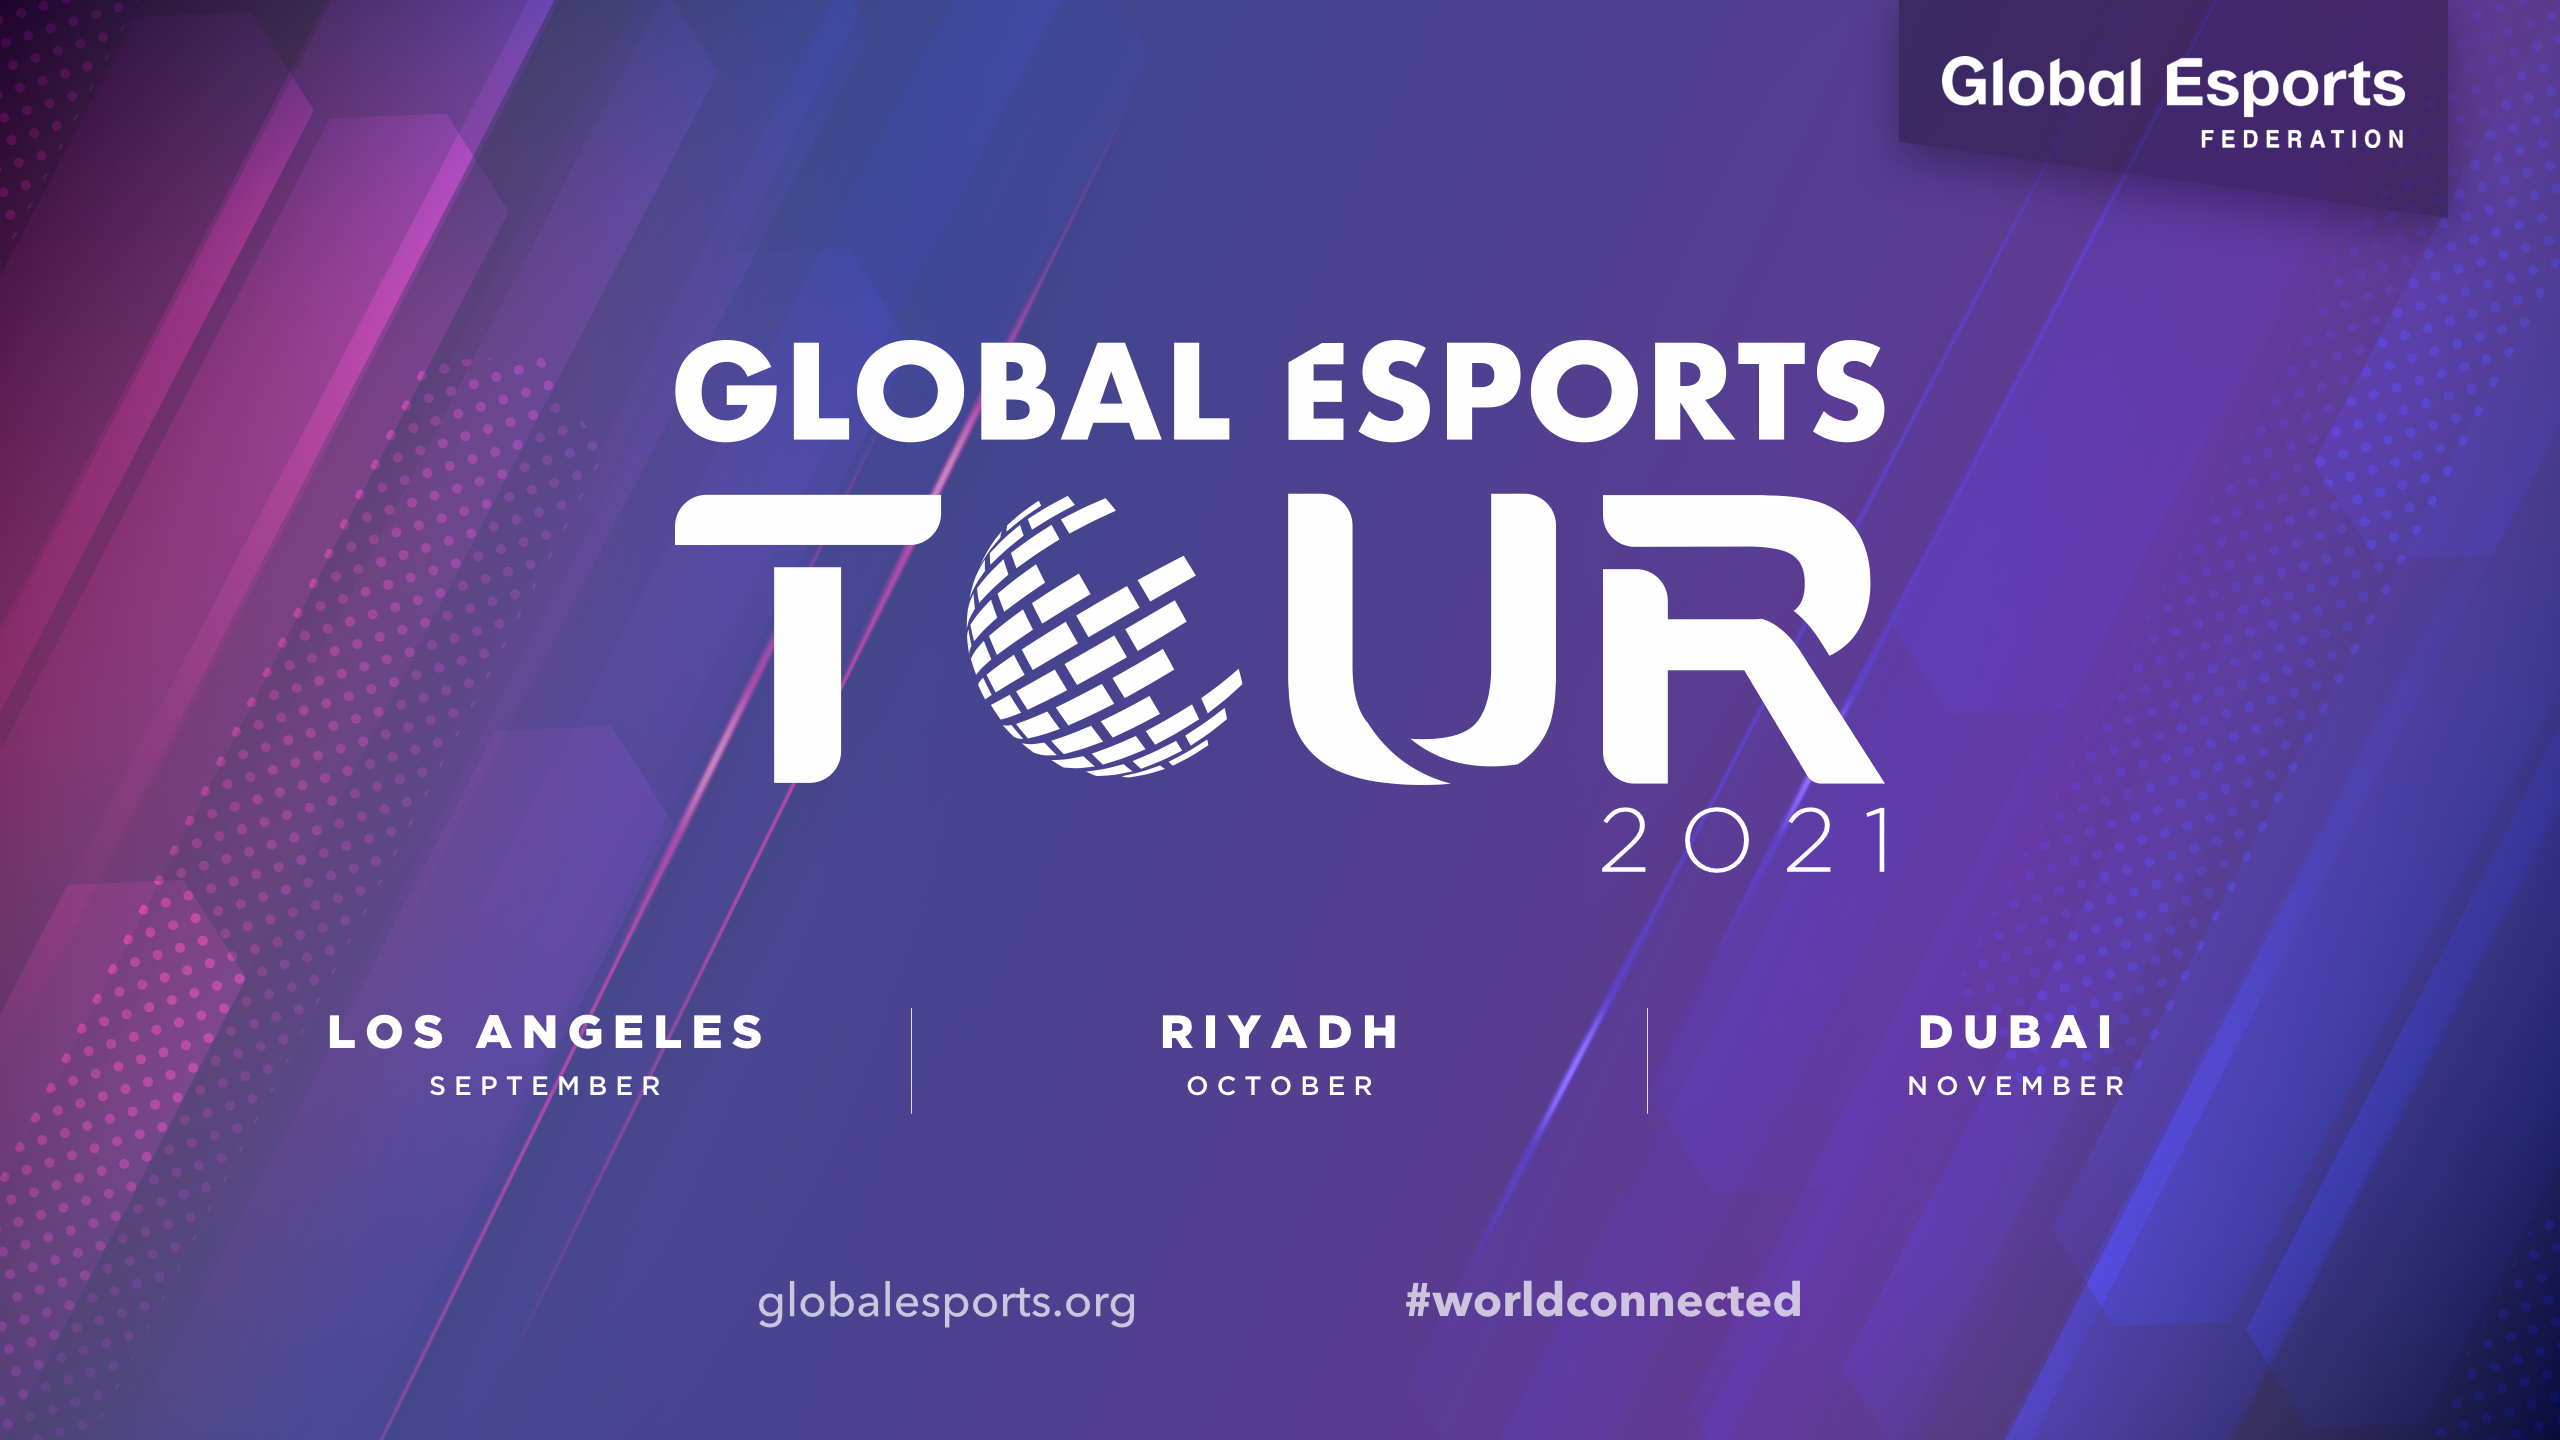 Global Esports Federation S Global Tour Starts September In Los Angeles Sportstravel